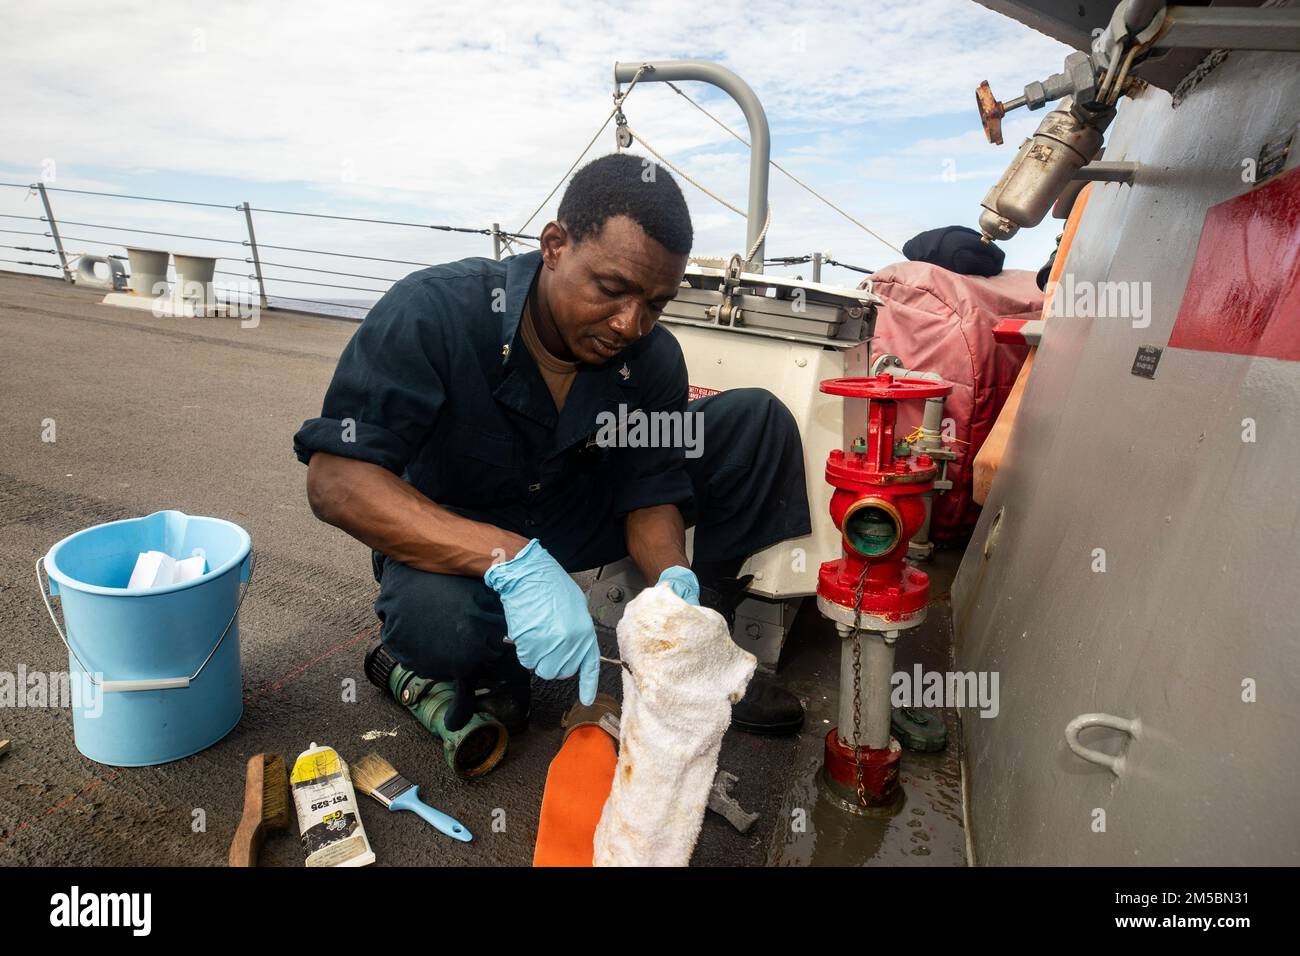 SOUTH CHINA SEA (Feb. 23, 2022) Damage Controlman 3rd Class Kouassi Date, from Dallas, conducts maintenance on a fireman plug aboard Arleigh Burke-class guided-missile destroyer USS Ralph Johnson (DDG 114). Ralph Johnson is assigned to Task Force 71/Destroyer Squadron (DESRON) 15, the Navy’s largest forward-deployed DESRON and the U.S. 7th fleet’s principal surface force. Stock Photo